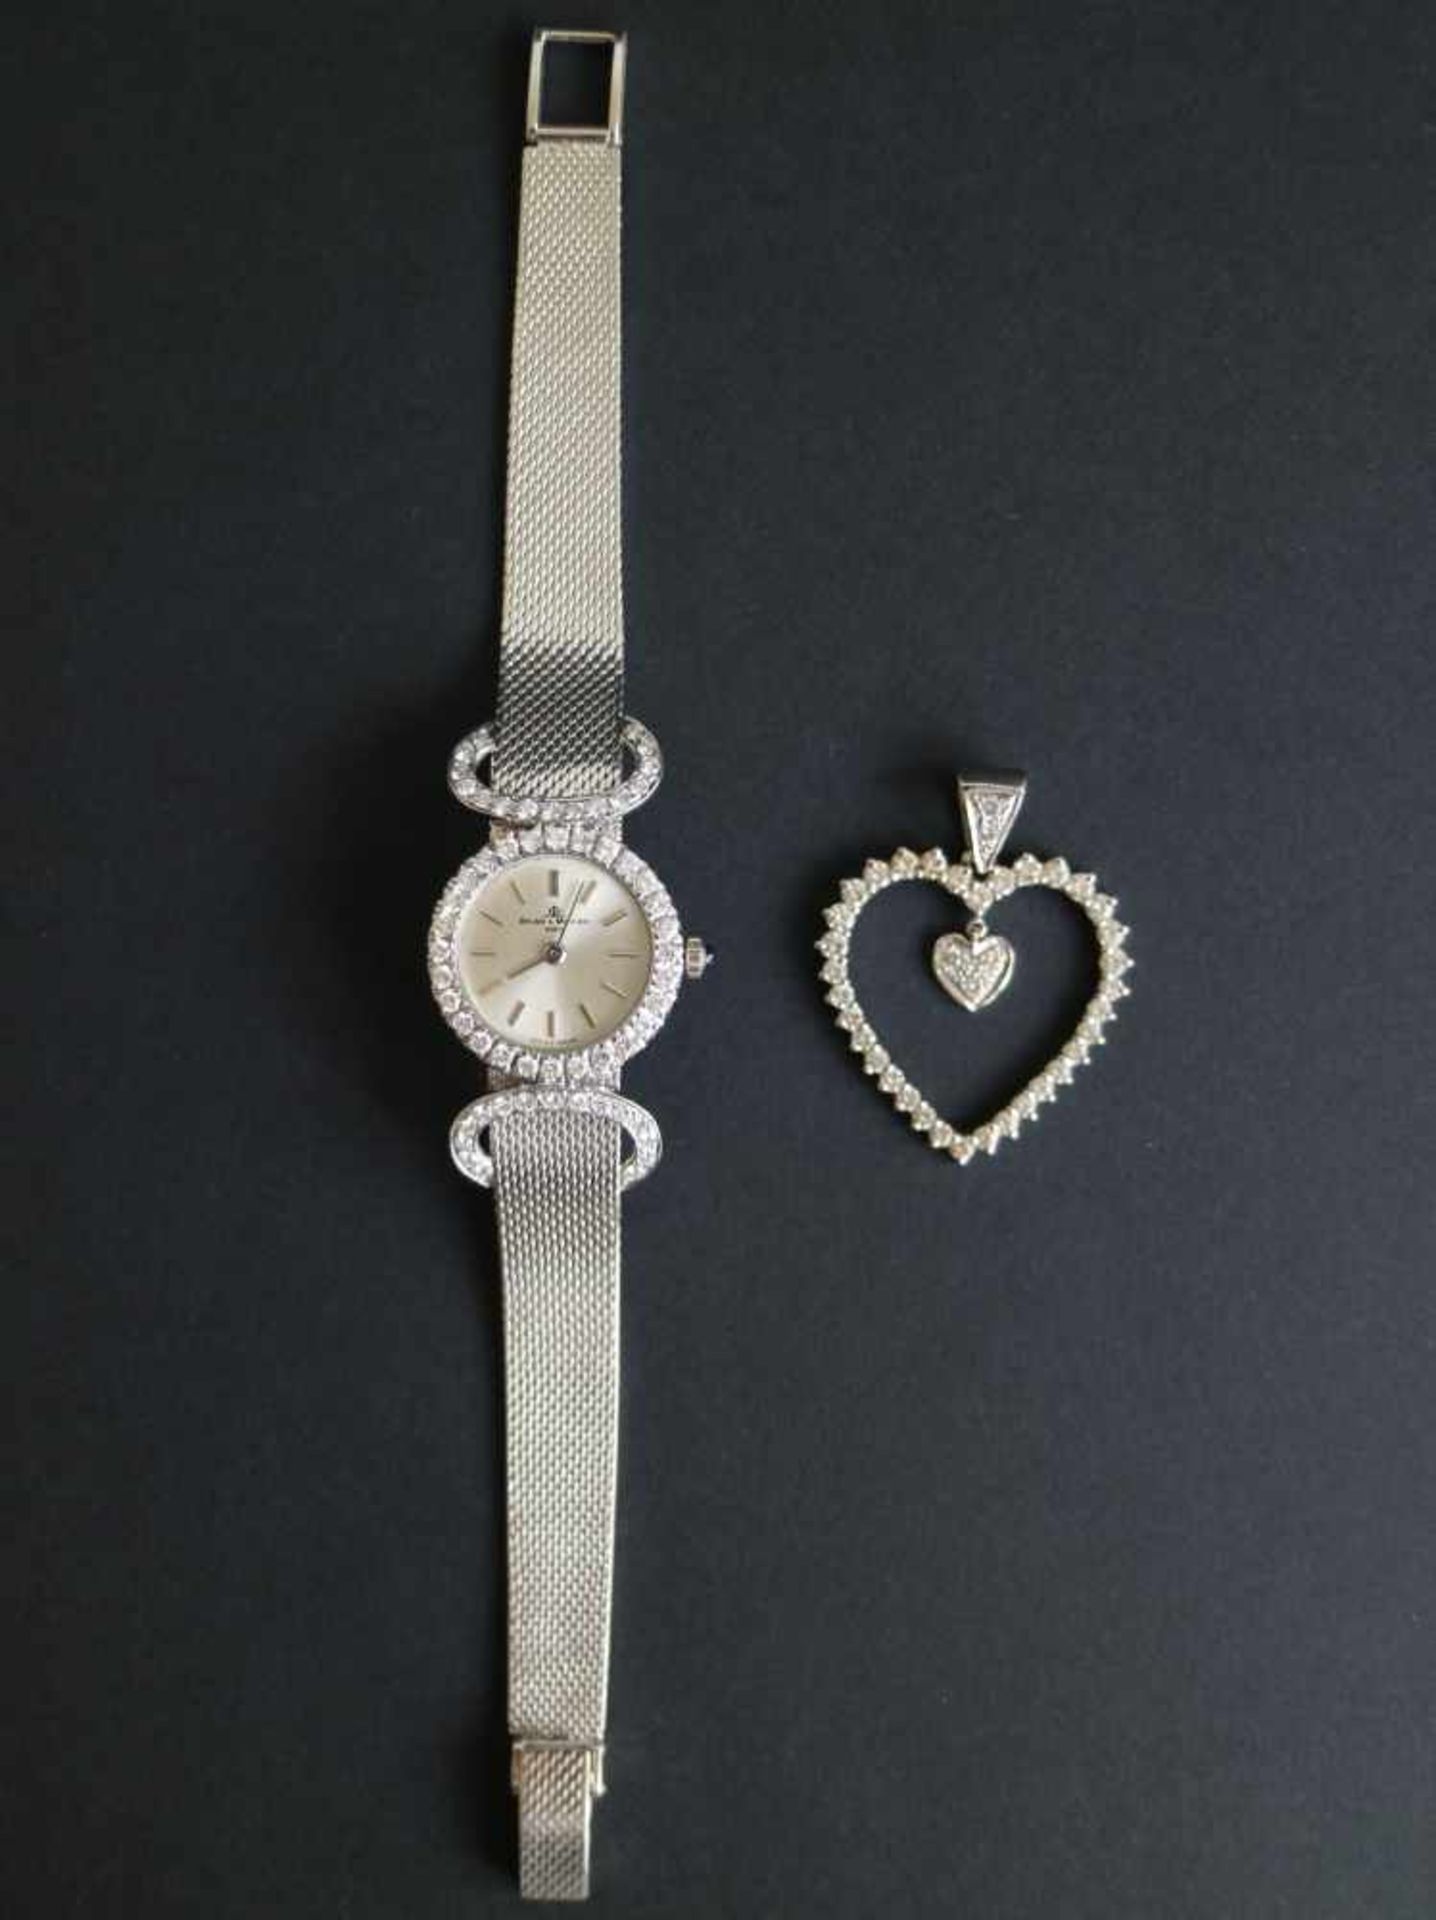 Beaume & Mercier ladies timepiece approx. 35 g with diamond 1.4 Kt and pendant heart with brilliant